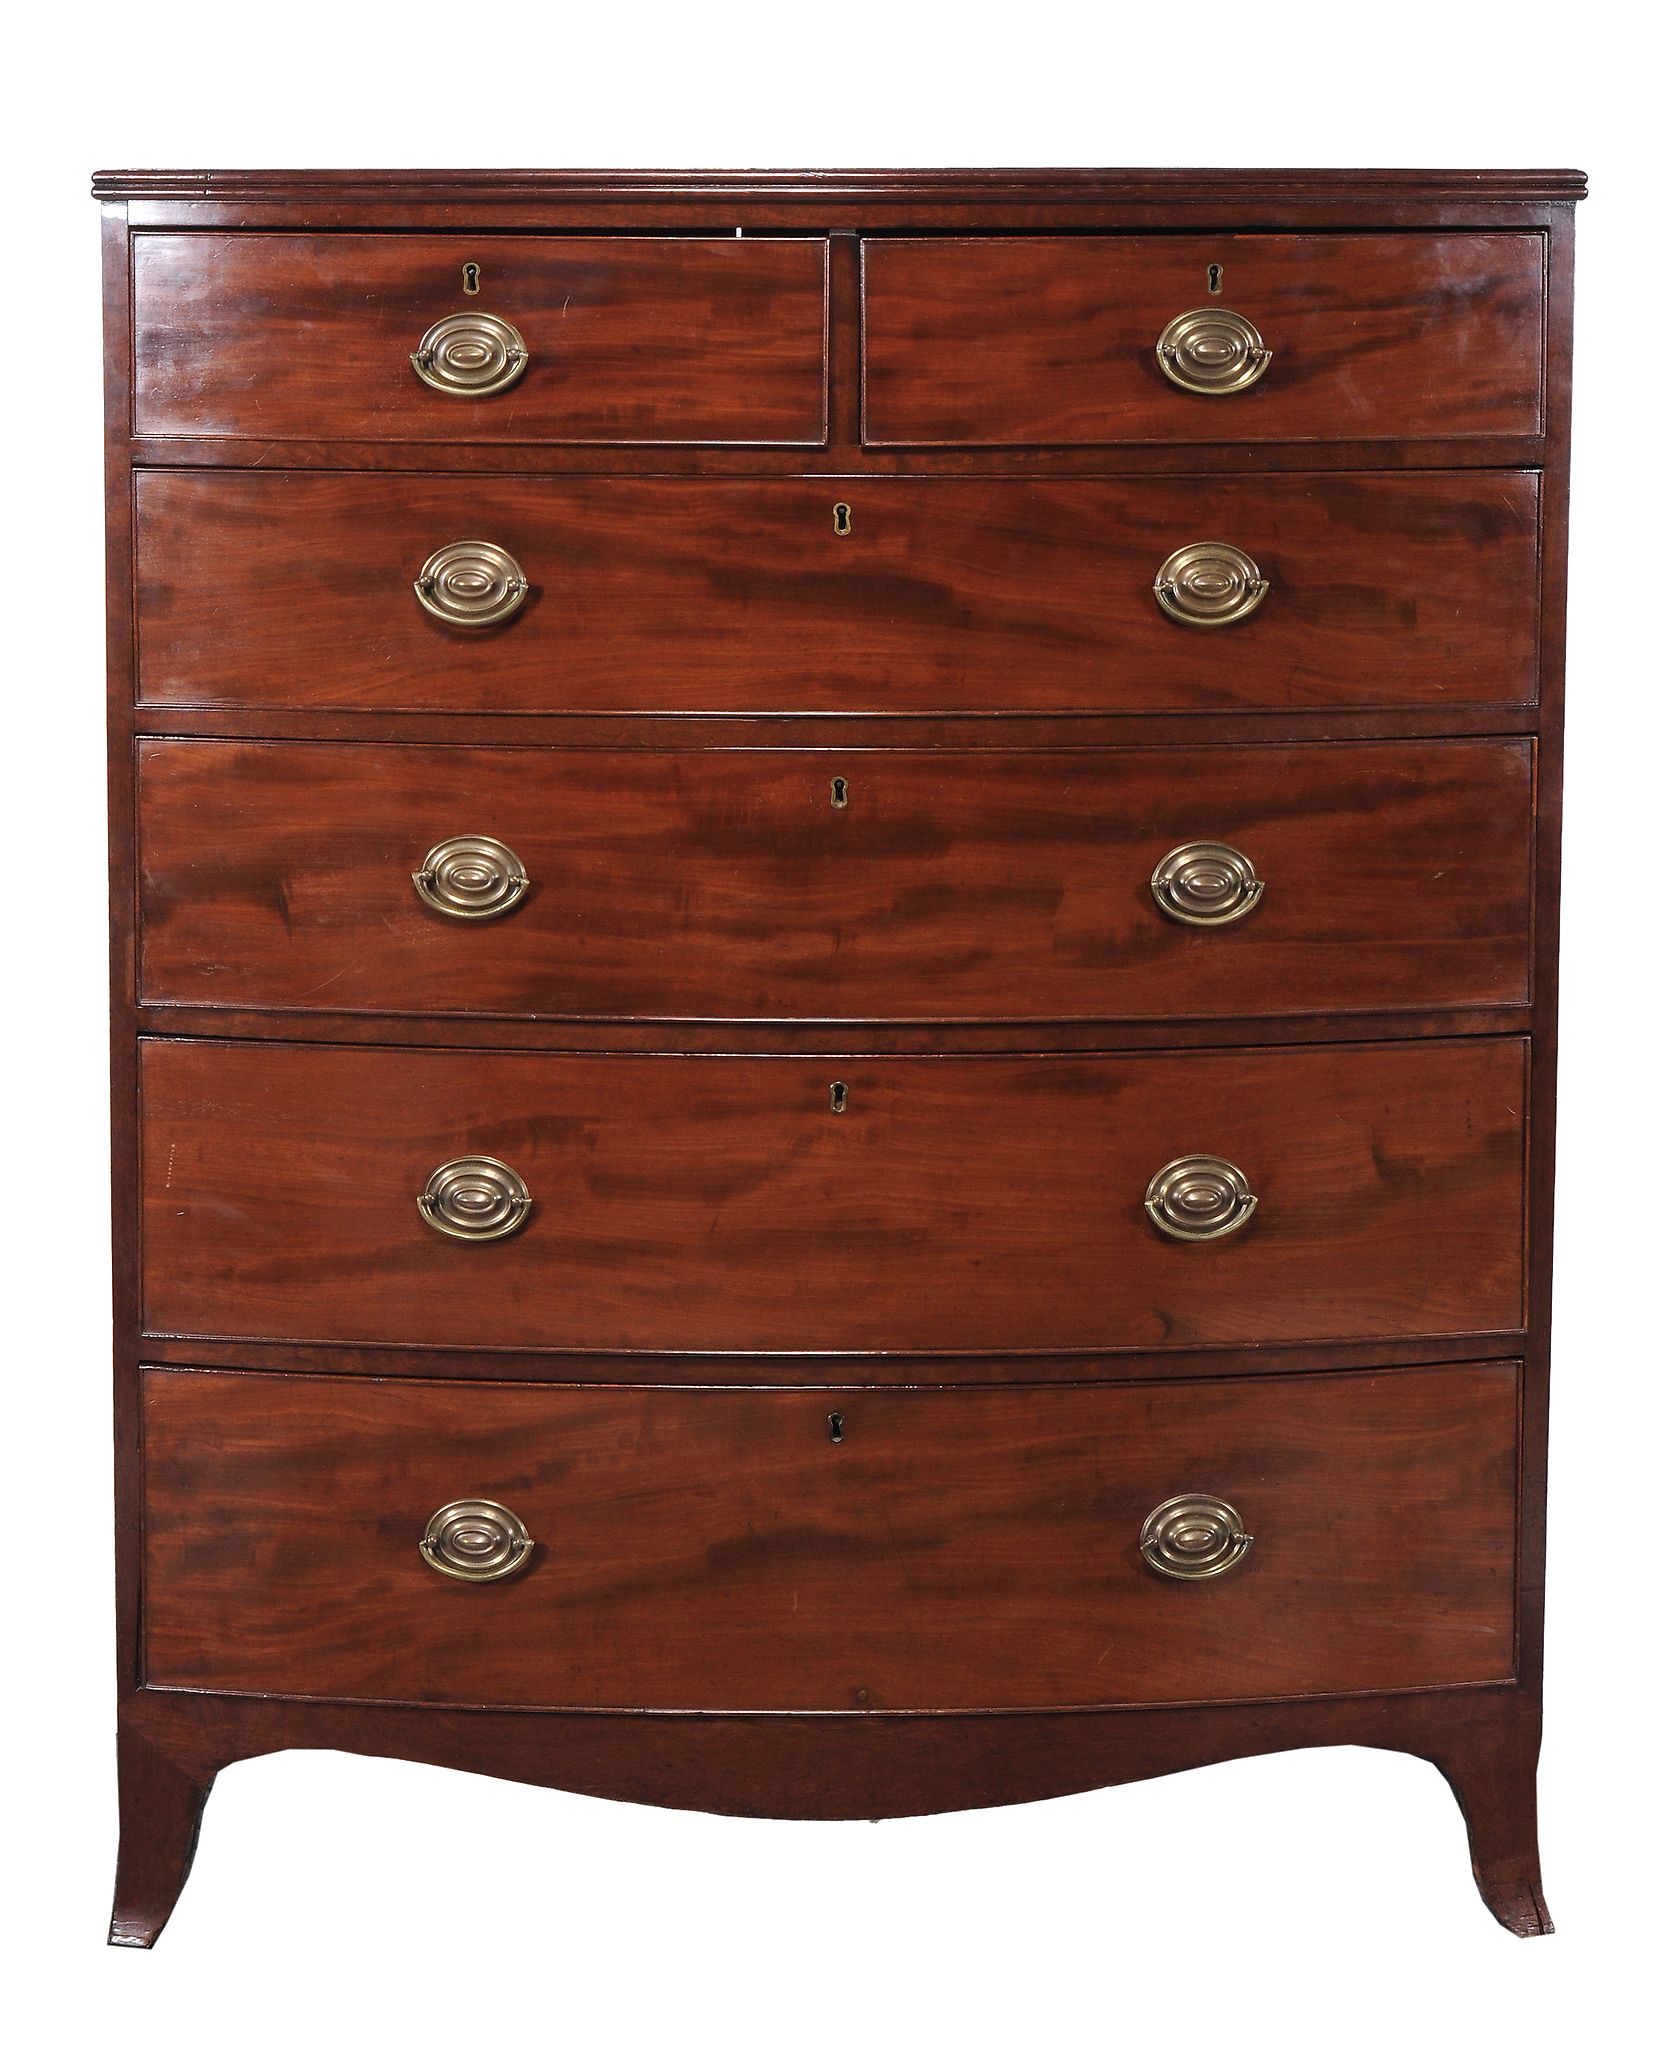 A George III mahogany bowfront chest of drawers , circa 1800  A George III mahogany bowfront chest